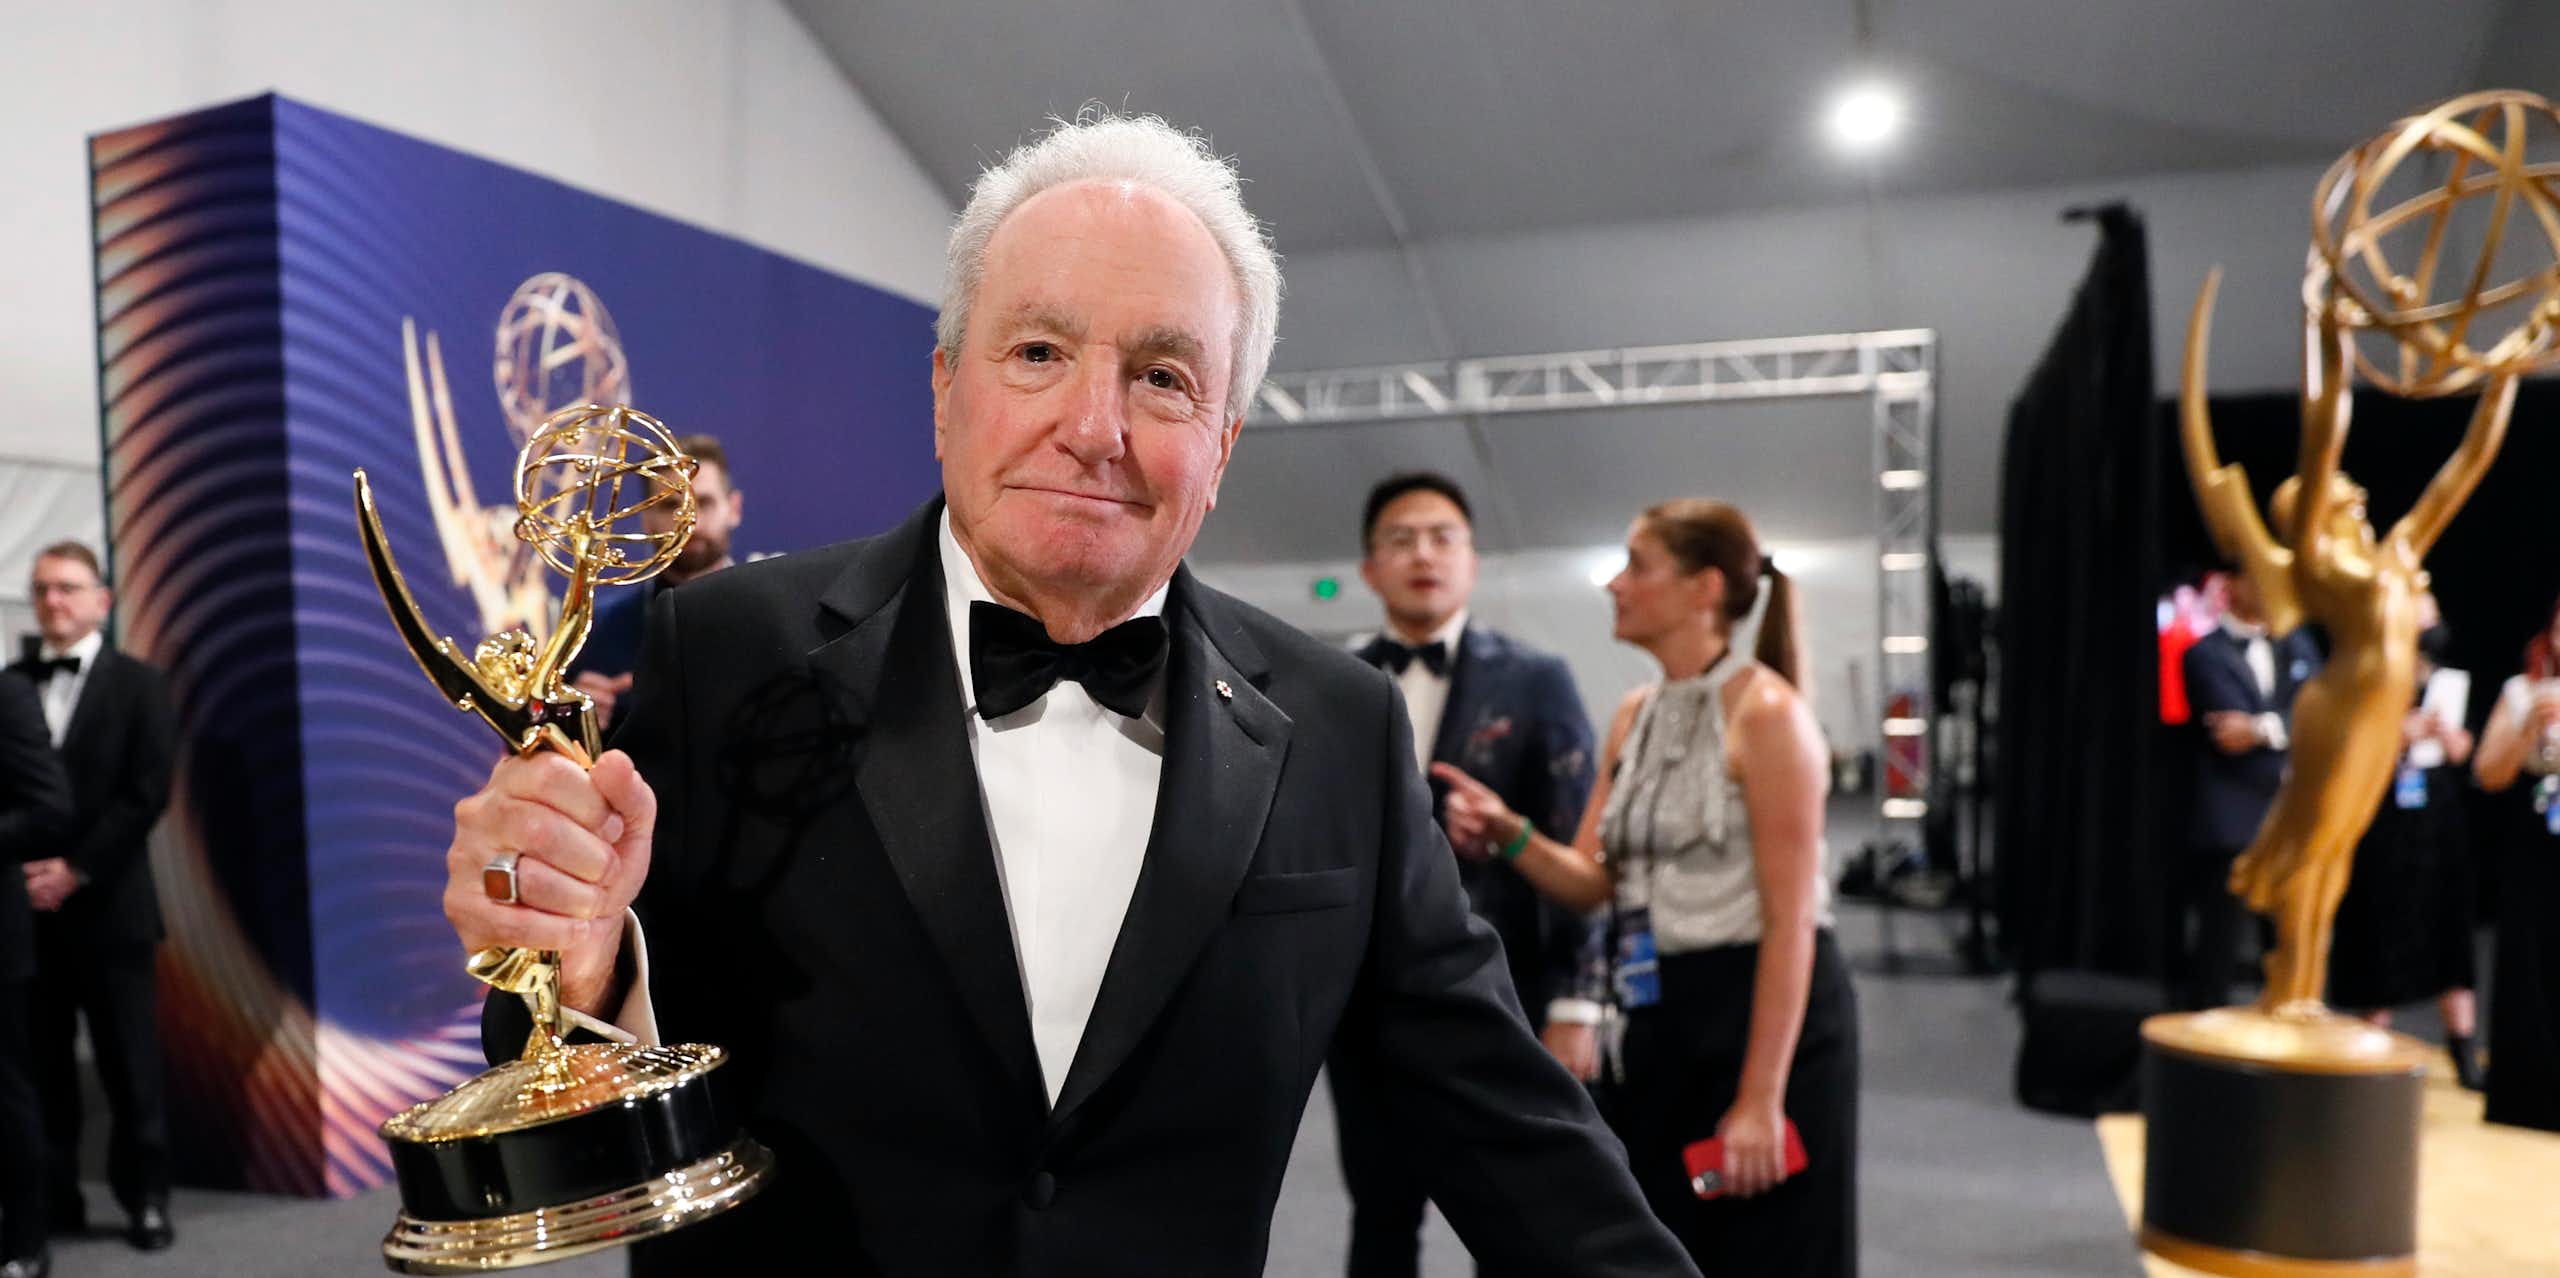 White-haired man in a tuxedo holds an Emmy award